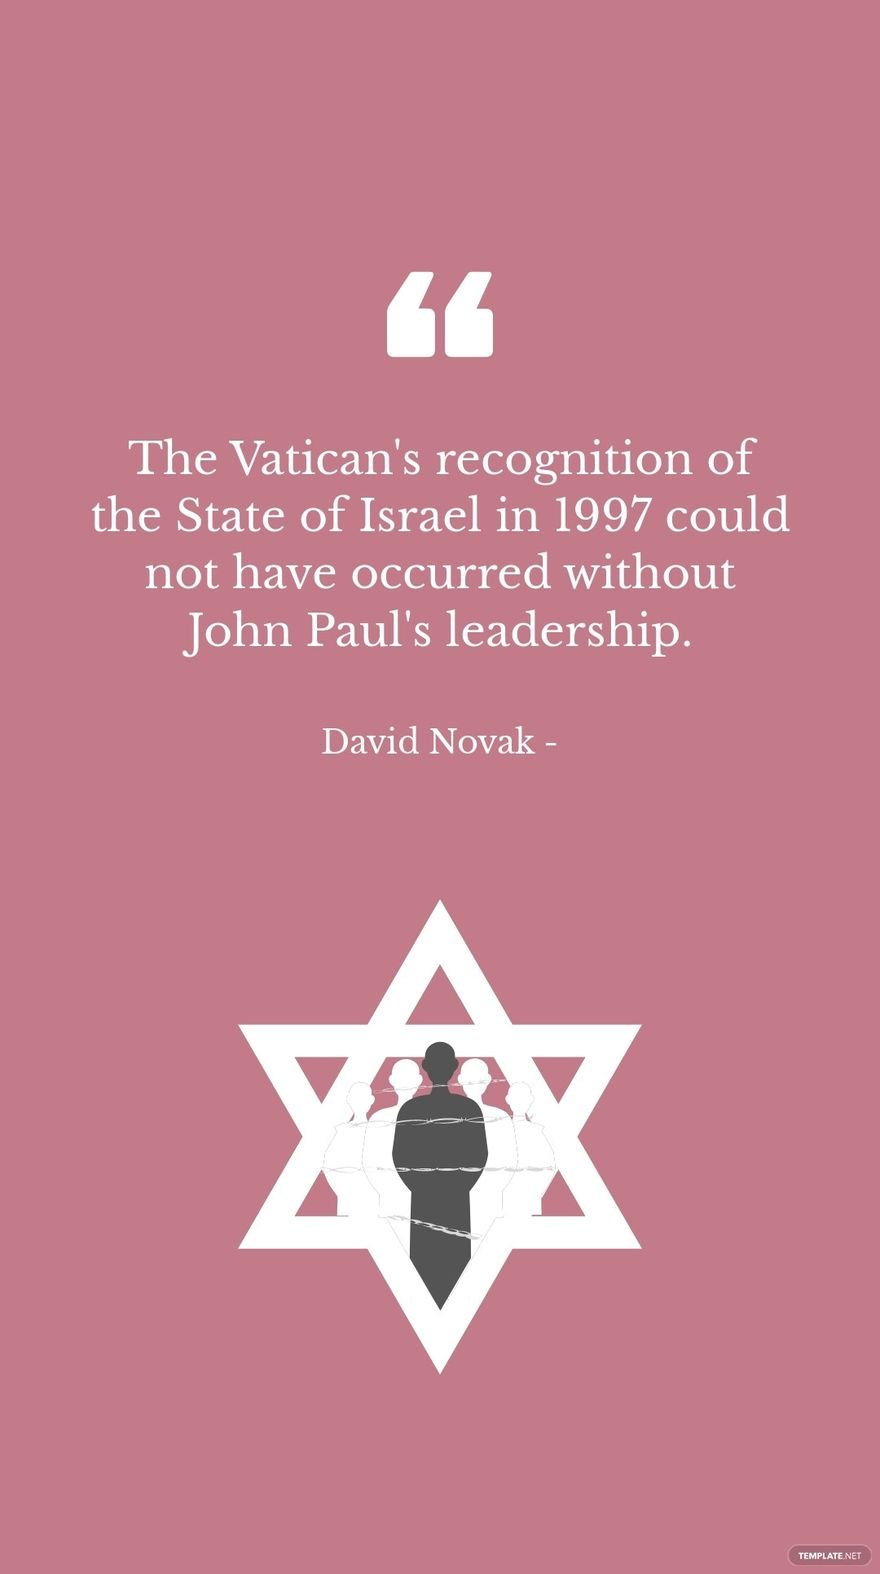 David Novak - The Vatican's recognition of the State of Israel in 1997 could not have occurred without John Paul's leadership.